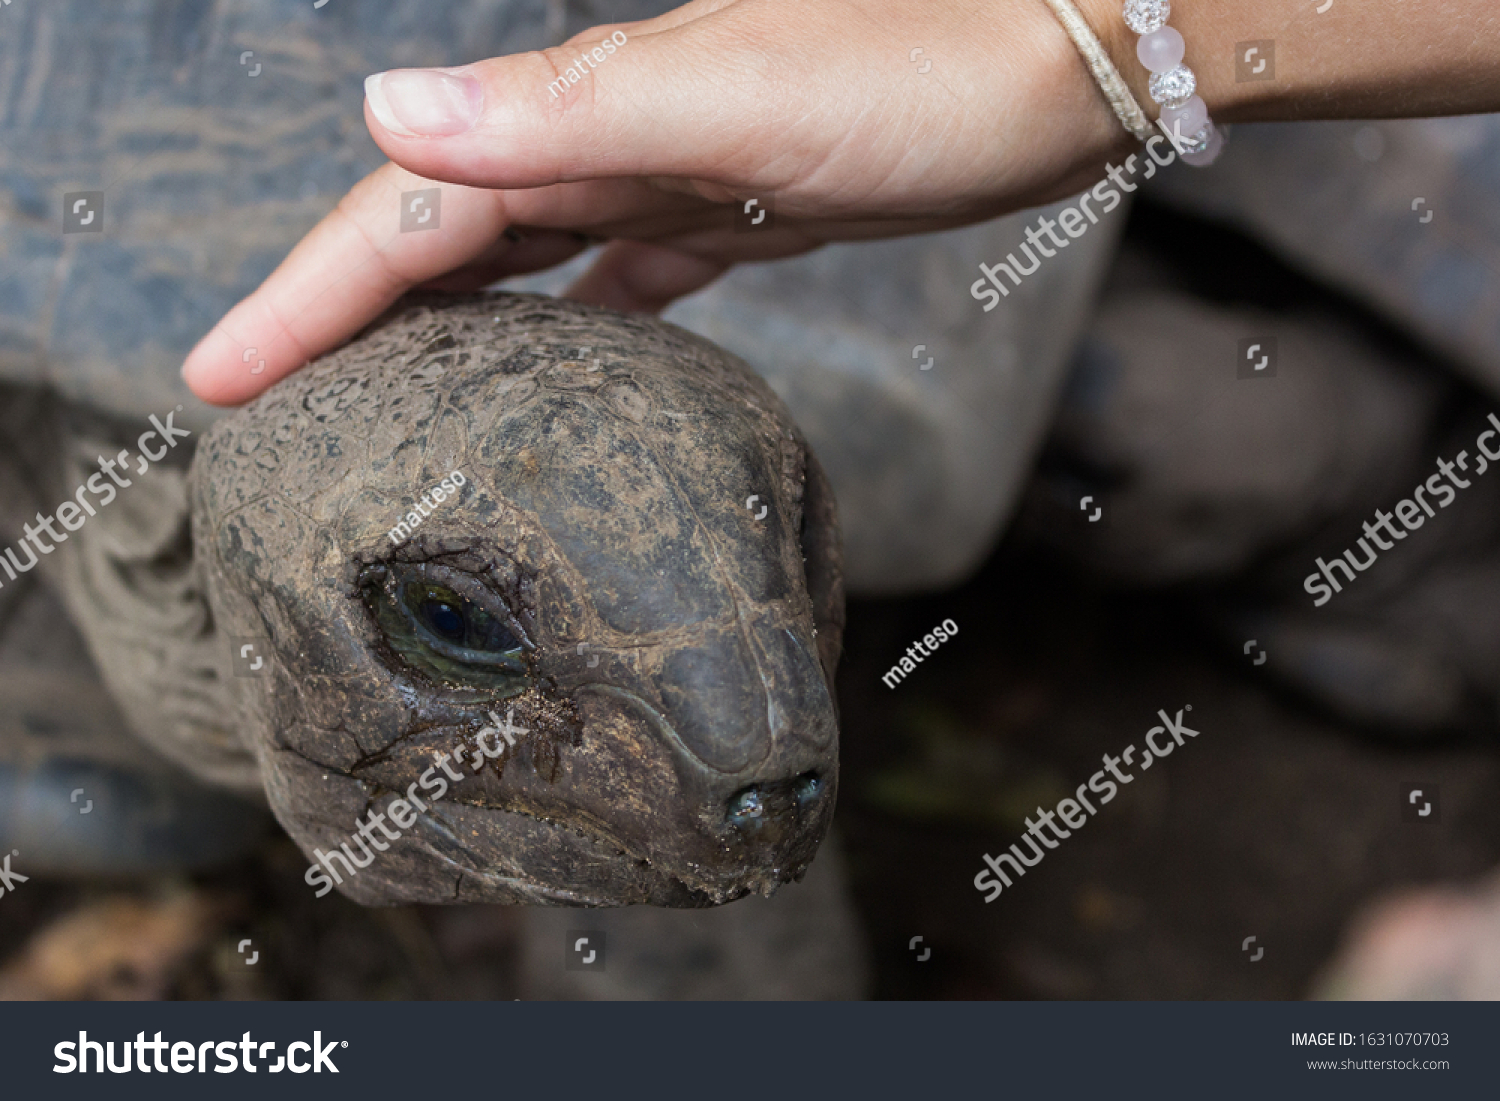 Hand stroking head of giant tortoise, caressing old and sad tortoise. Seychelles, Domaine de l'Union. #1631070703